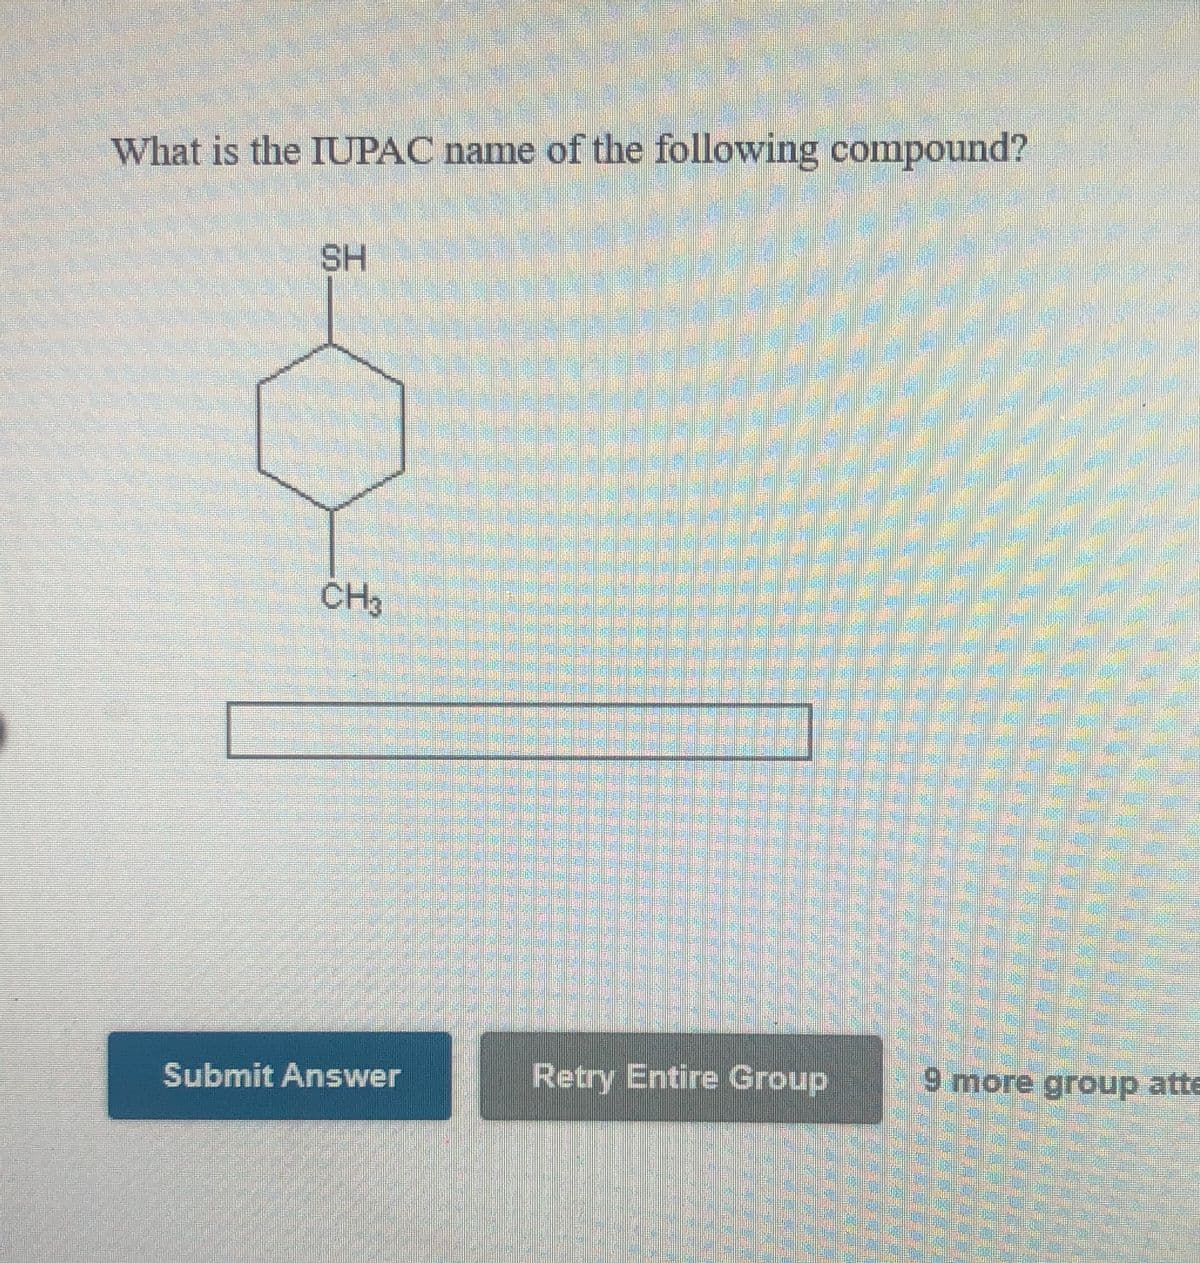 What is the IUPAC name of the following compound?
SH
CH3
Submit Answer
Retry Entire Group
9 more group atte
